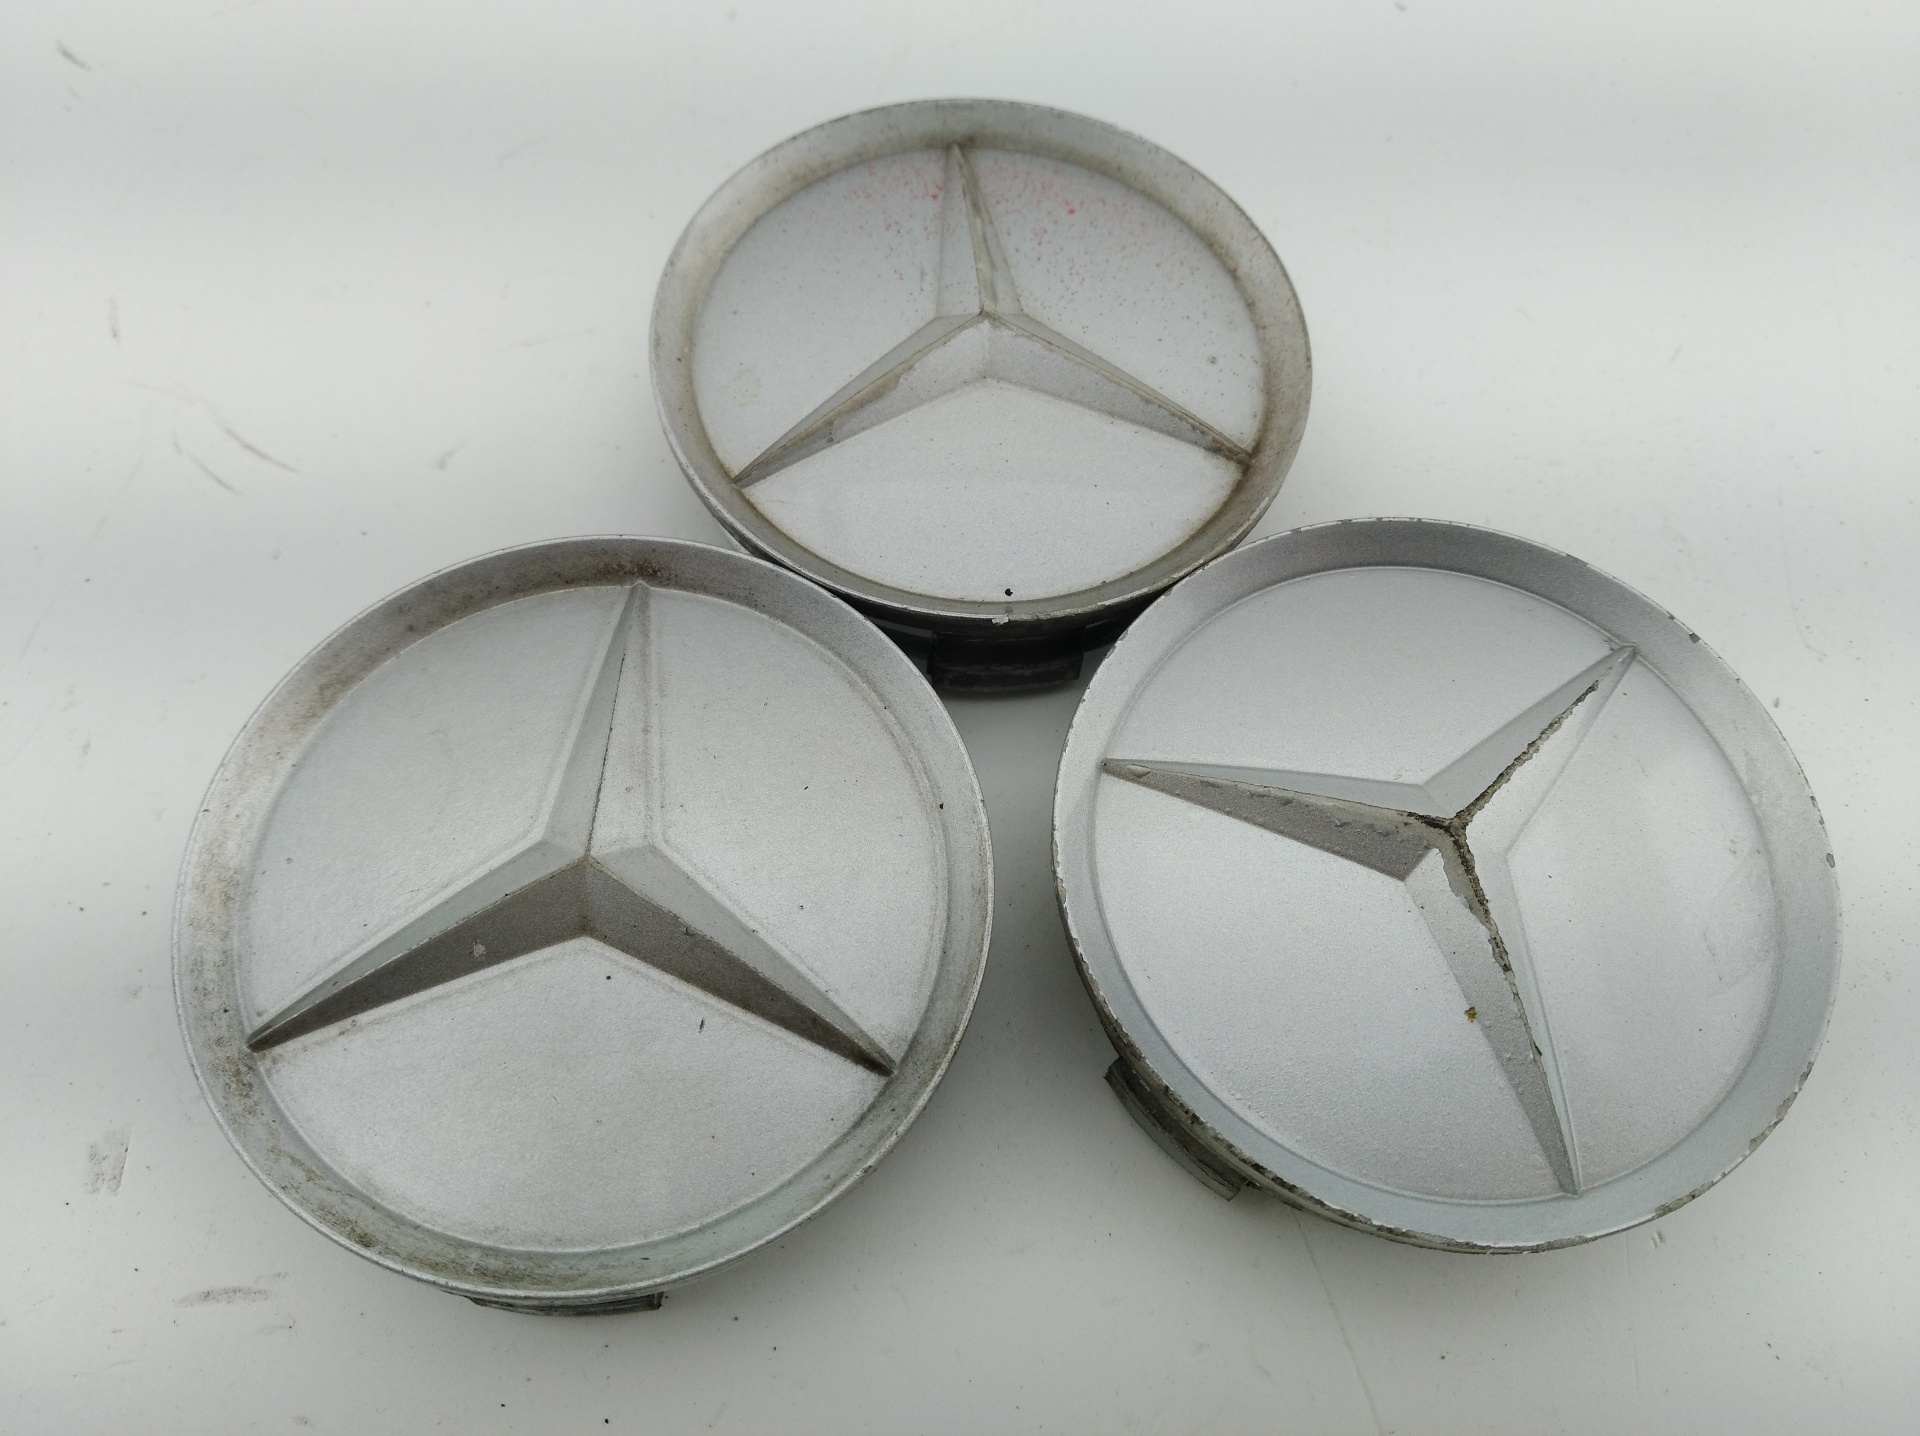 MERCEDES-BENZ 190 (W201) 1 generation (1982-1993) Wheel Covers 2014010225, 2014010225, 2014010225 24666057